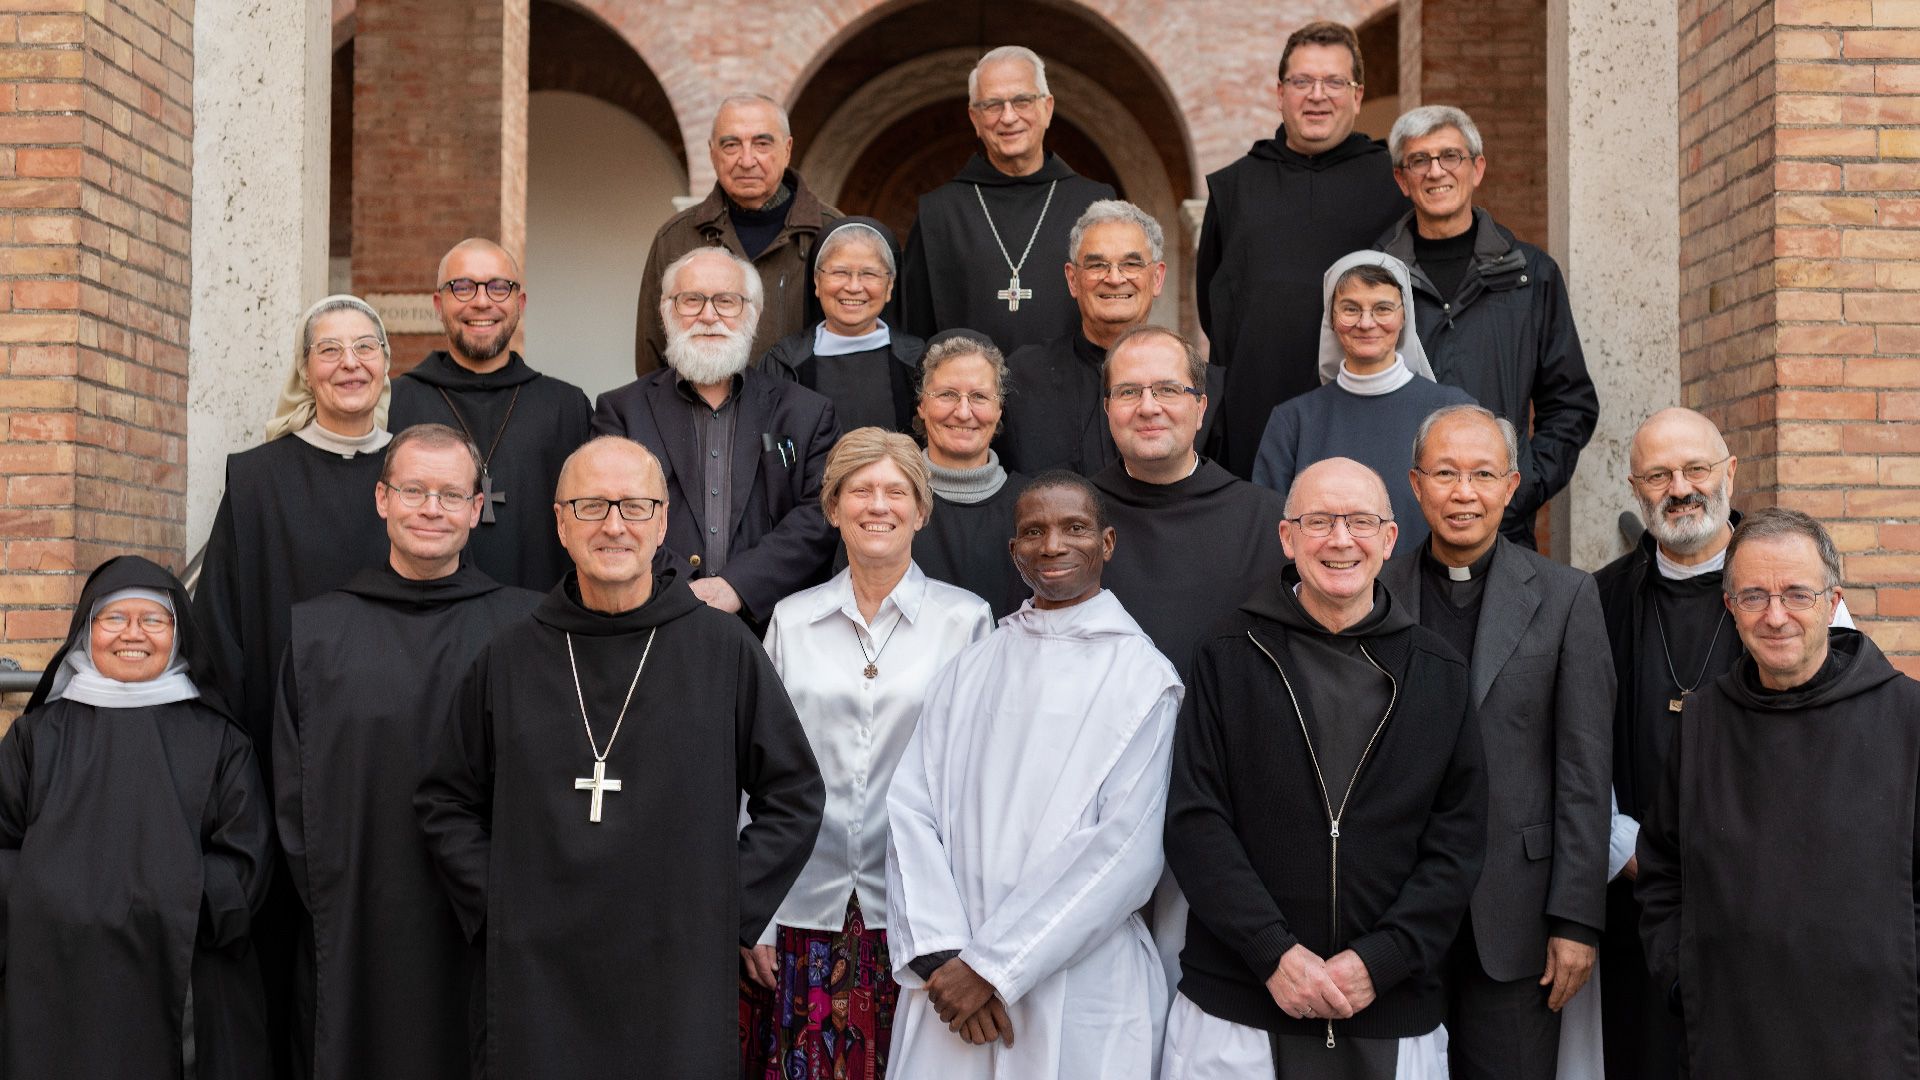 The Annual Council Meeting of the Alliance for International Monasticism